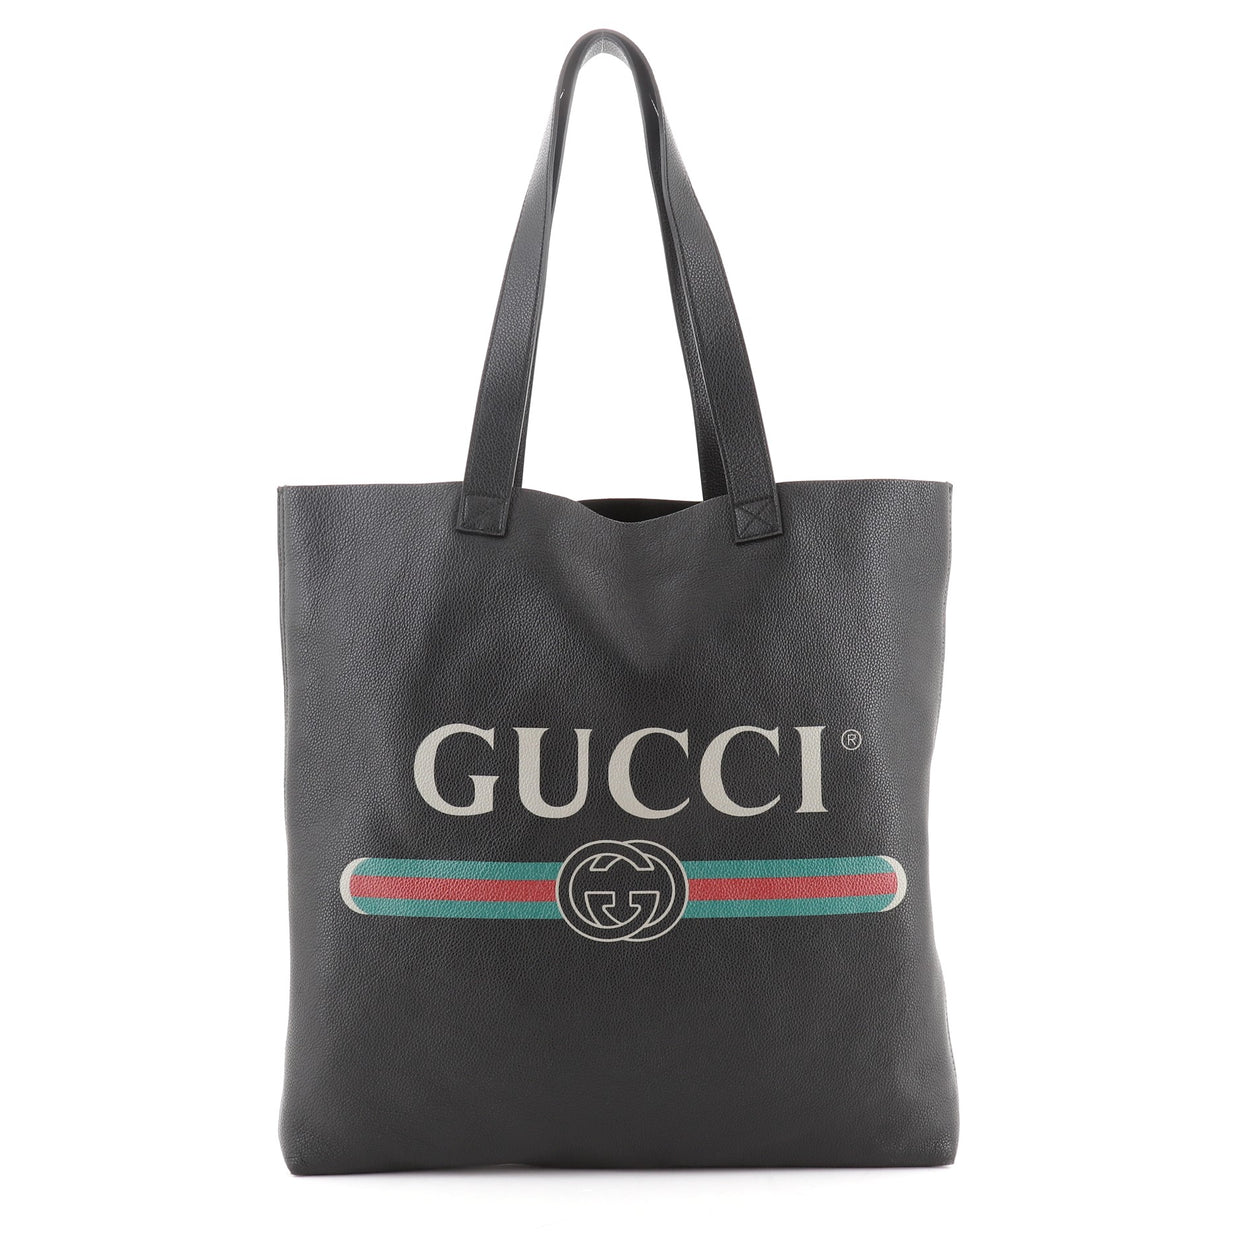 Gucci Logo Tote Printed Leather Large Black 59855124